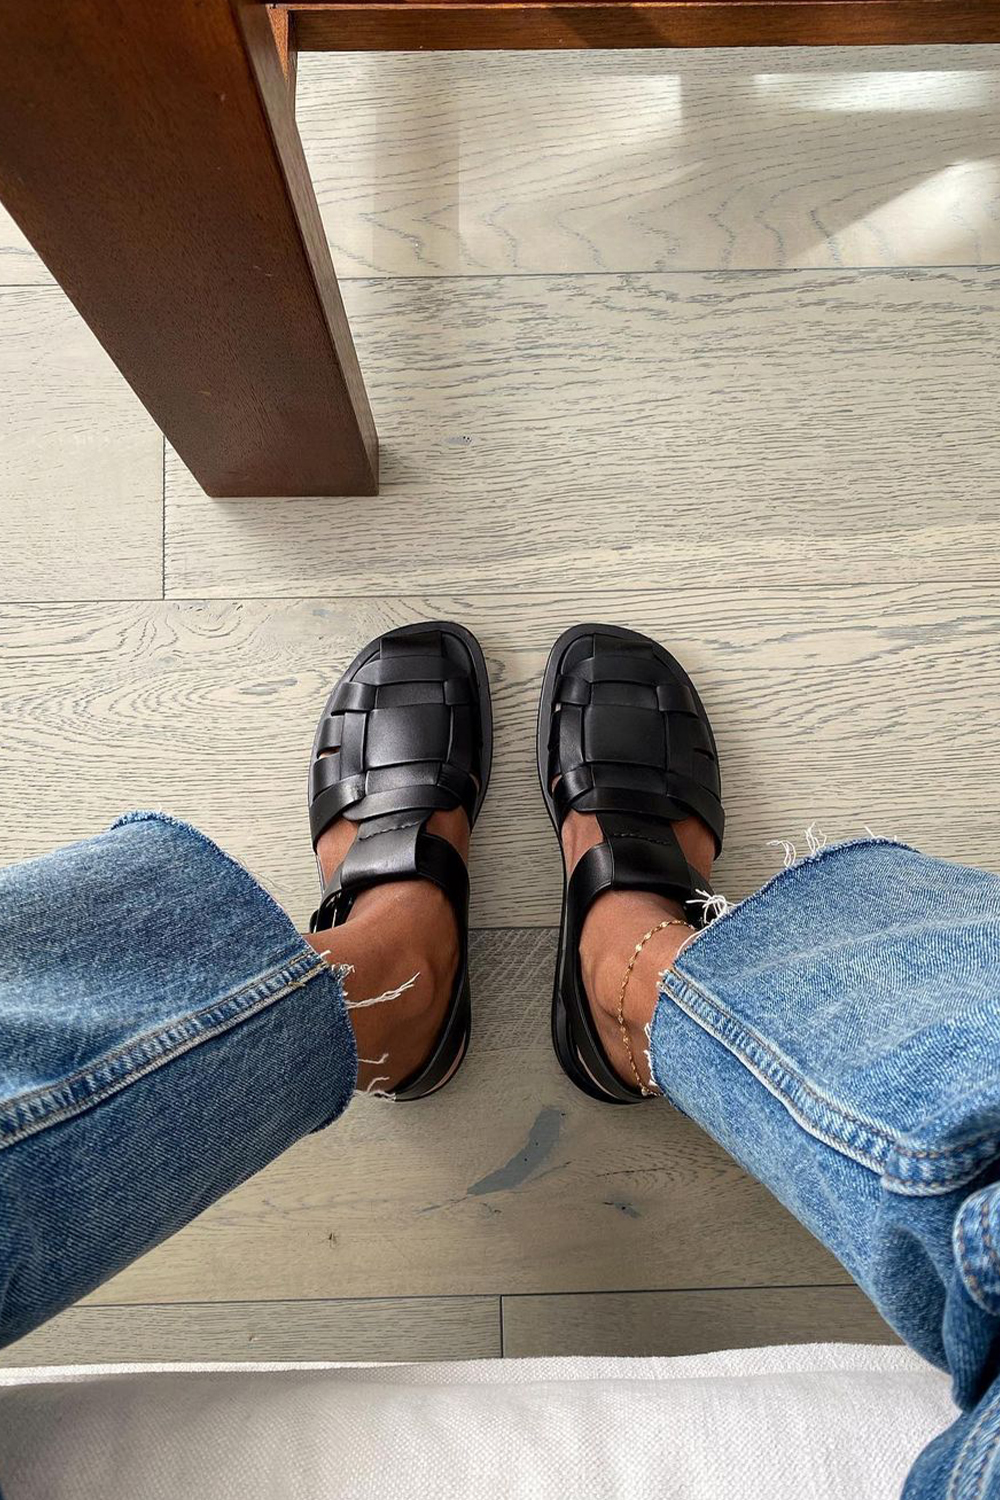 I Love Wearing Sandals and These Are the 6 New Trends I’m Into